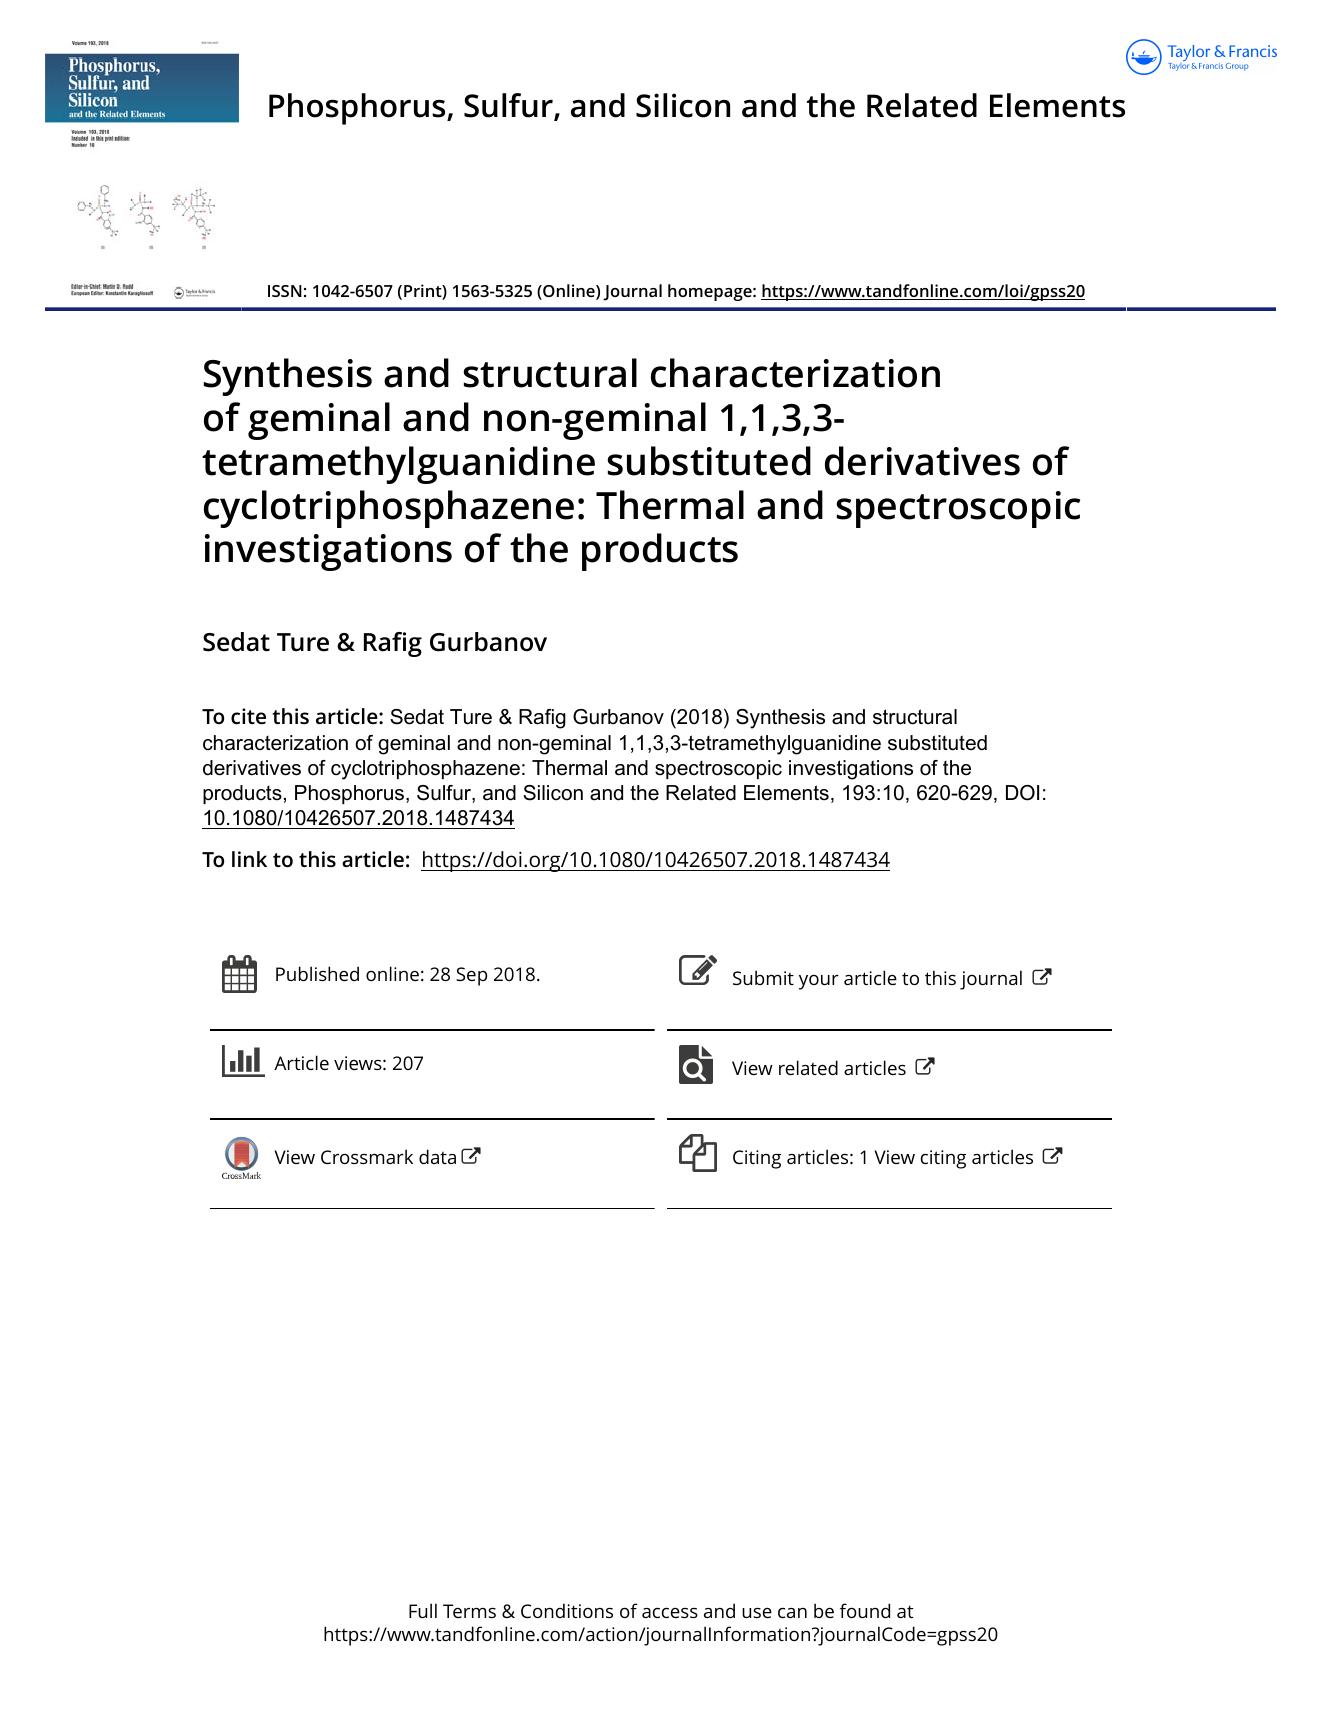 Synthesis and structural characterization of geminal and non-geminal 1,1,3,3-tetramethylguanidine substituted derivatives of cyclotriphosphazene: Thermal and spectroscopic investig by Ture Sedat & Gurbanov Rafig